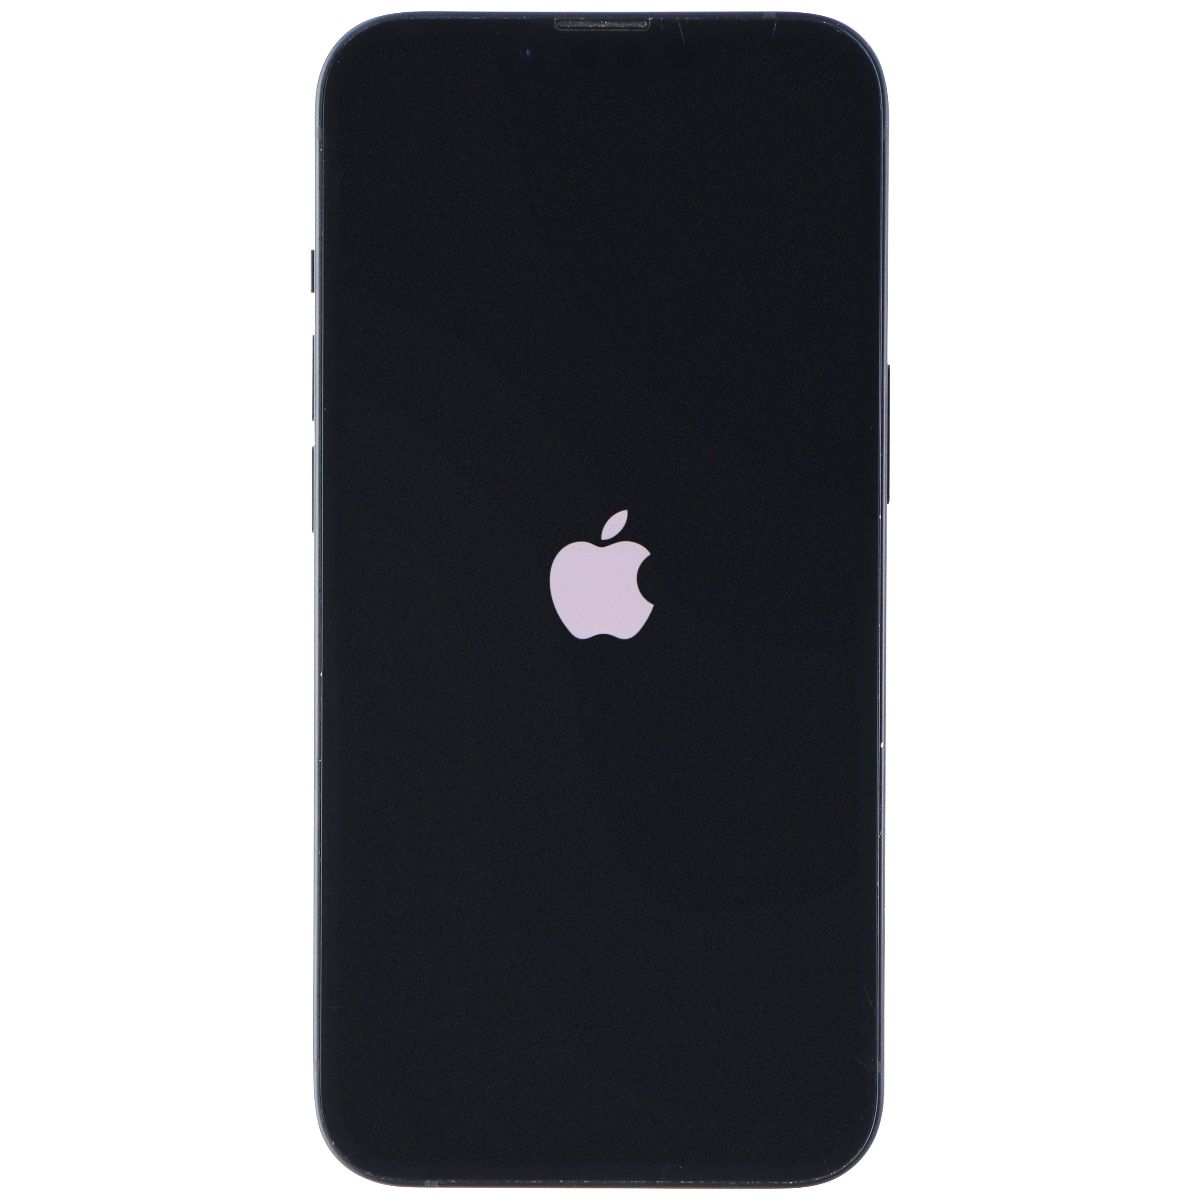 Apple iPhone 13 (6.1-inch) (A2482) Unlocked - 128GB/Midnight - BAD PROX SENSOR* Cell Phones & Smartphones Apple    - Simple Cell Bulk Wholesale Pricing - USA Seller